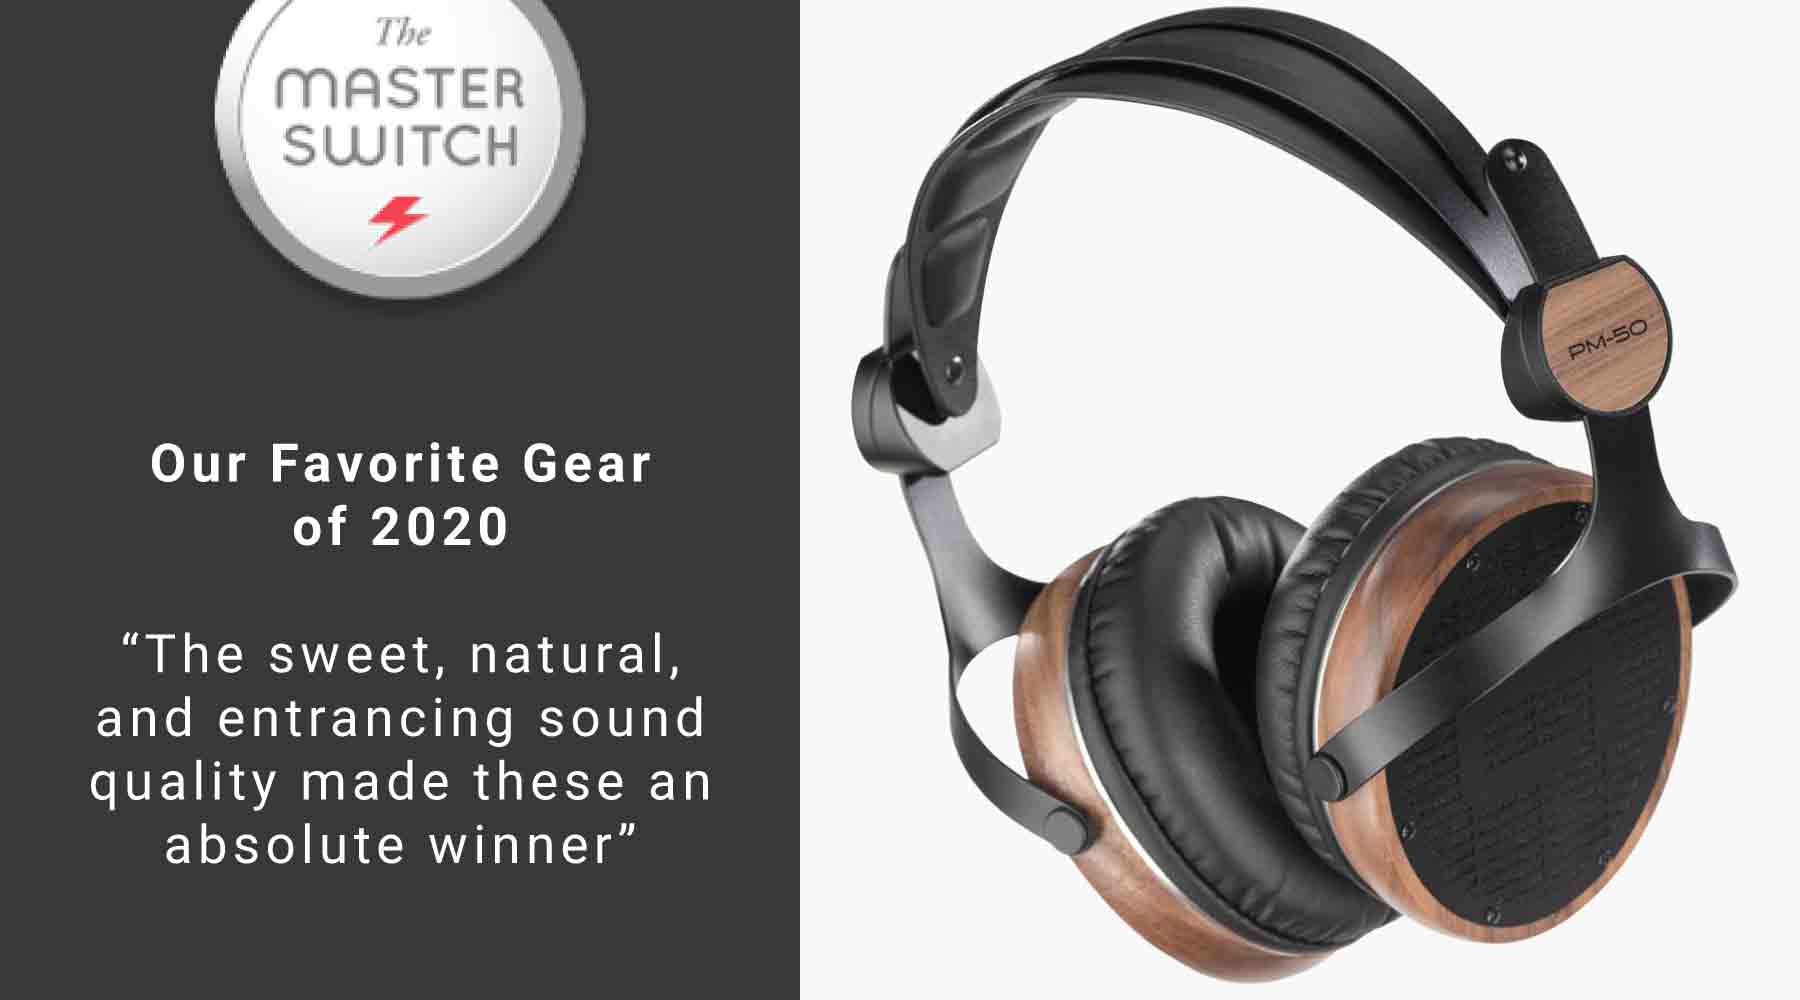 The Master Switch includes PM-50s in "Our Favorite Gear of 2020" List